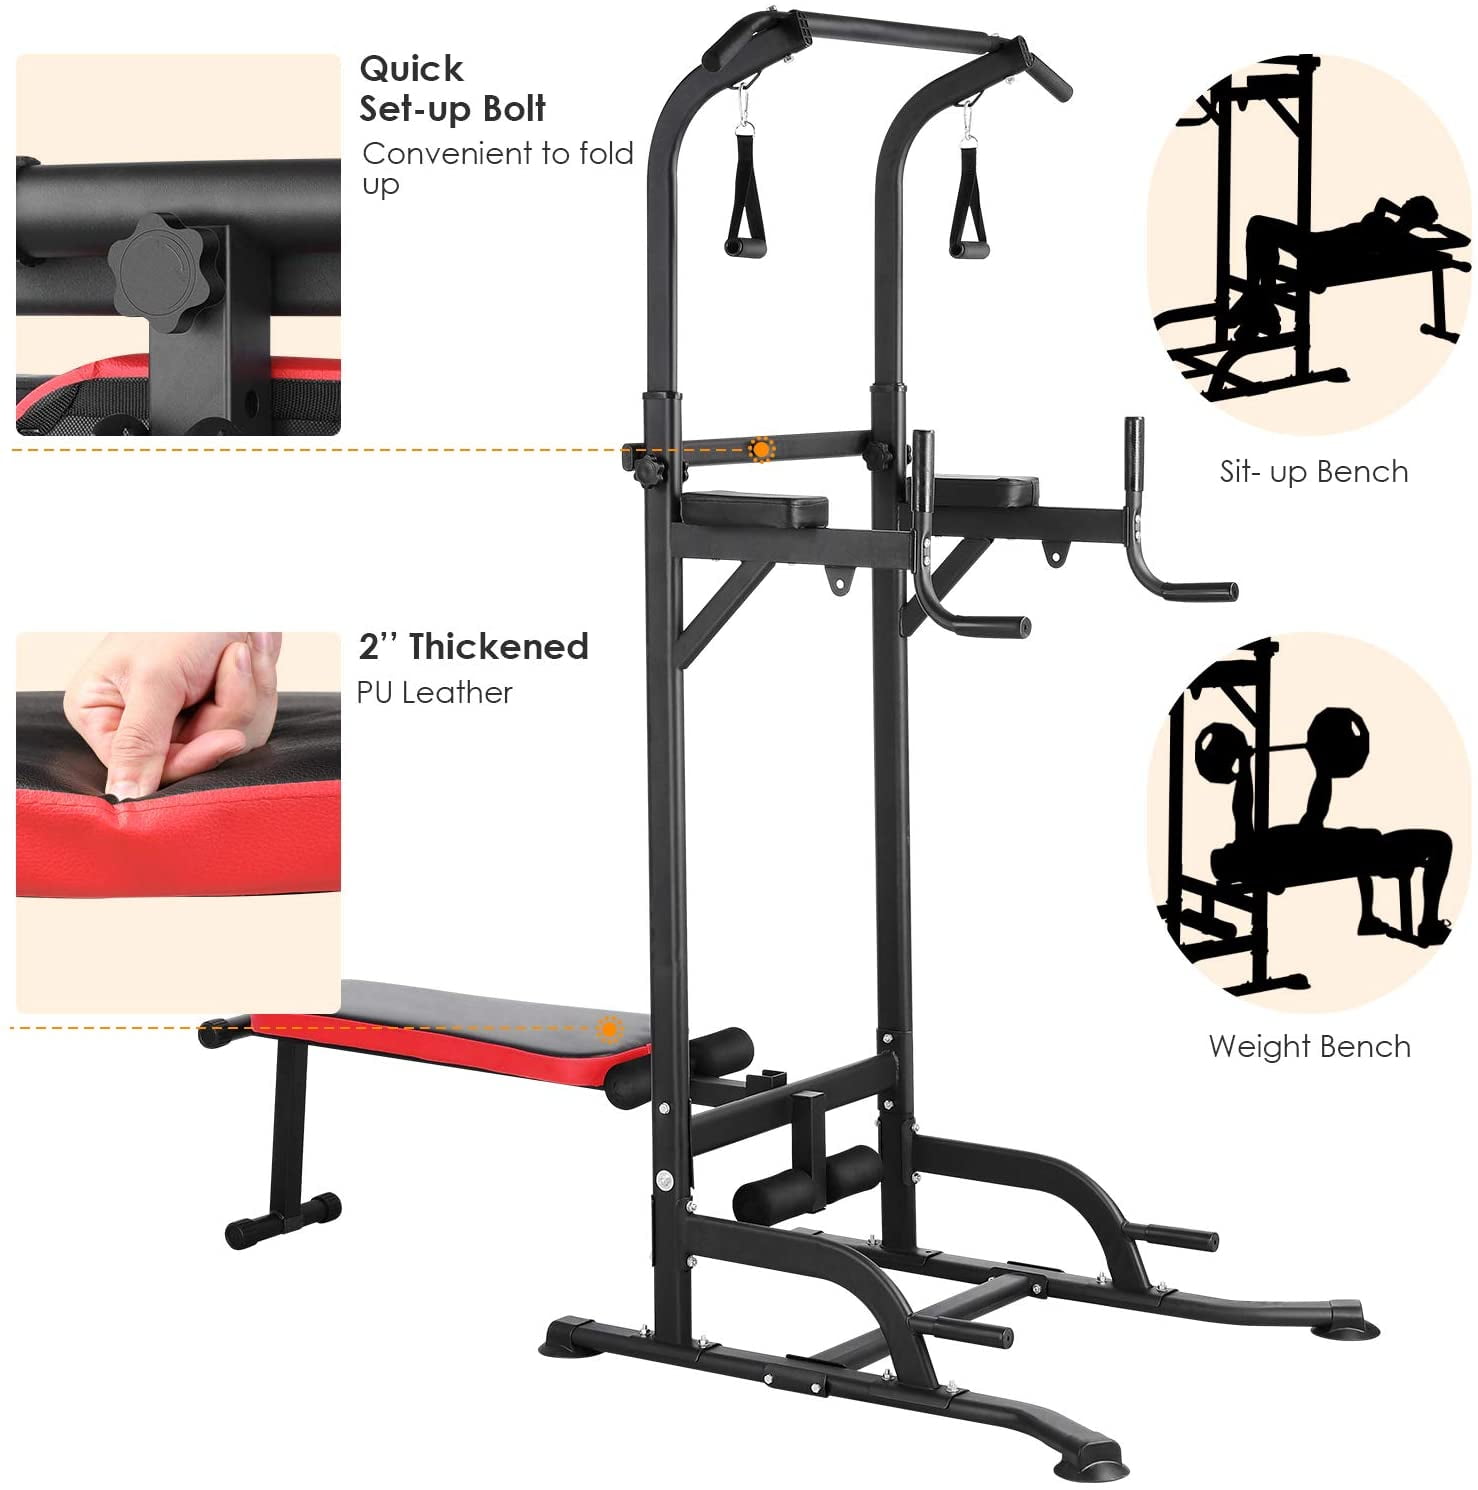 FITNESS POWER TOWER BENCH HOME GYM FITNESS WORKOUT STATION CHIN UP ABS PULL UPS 